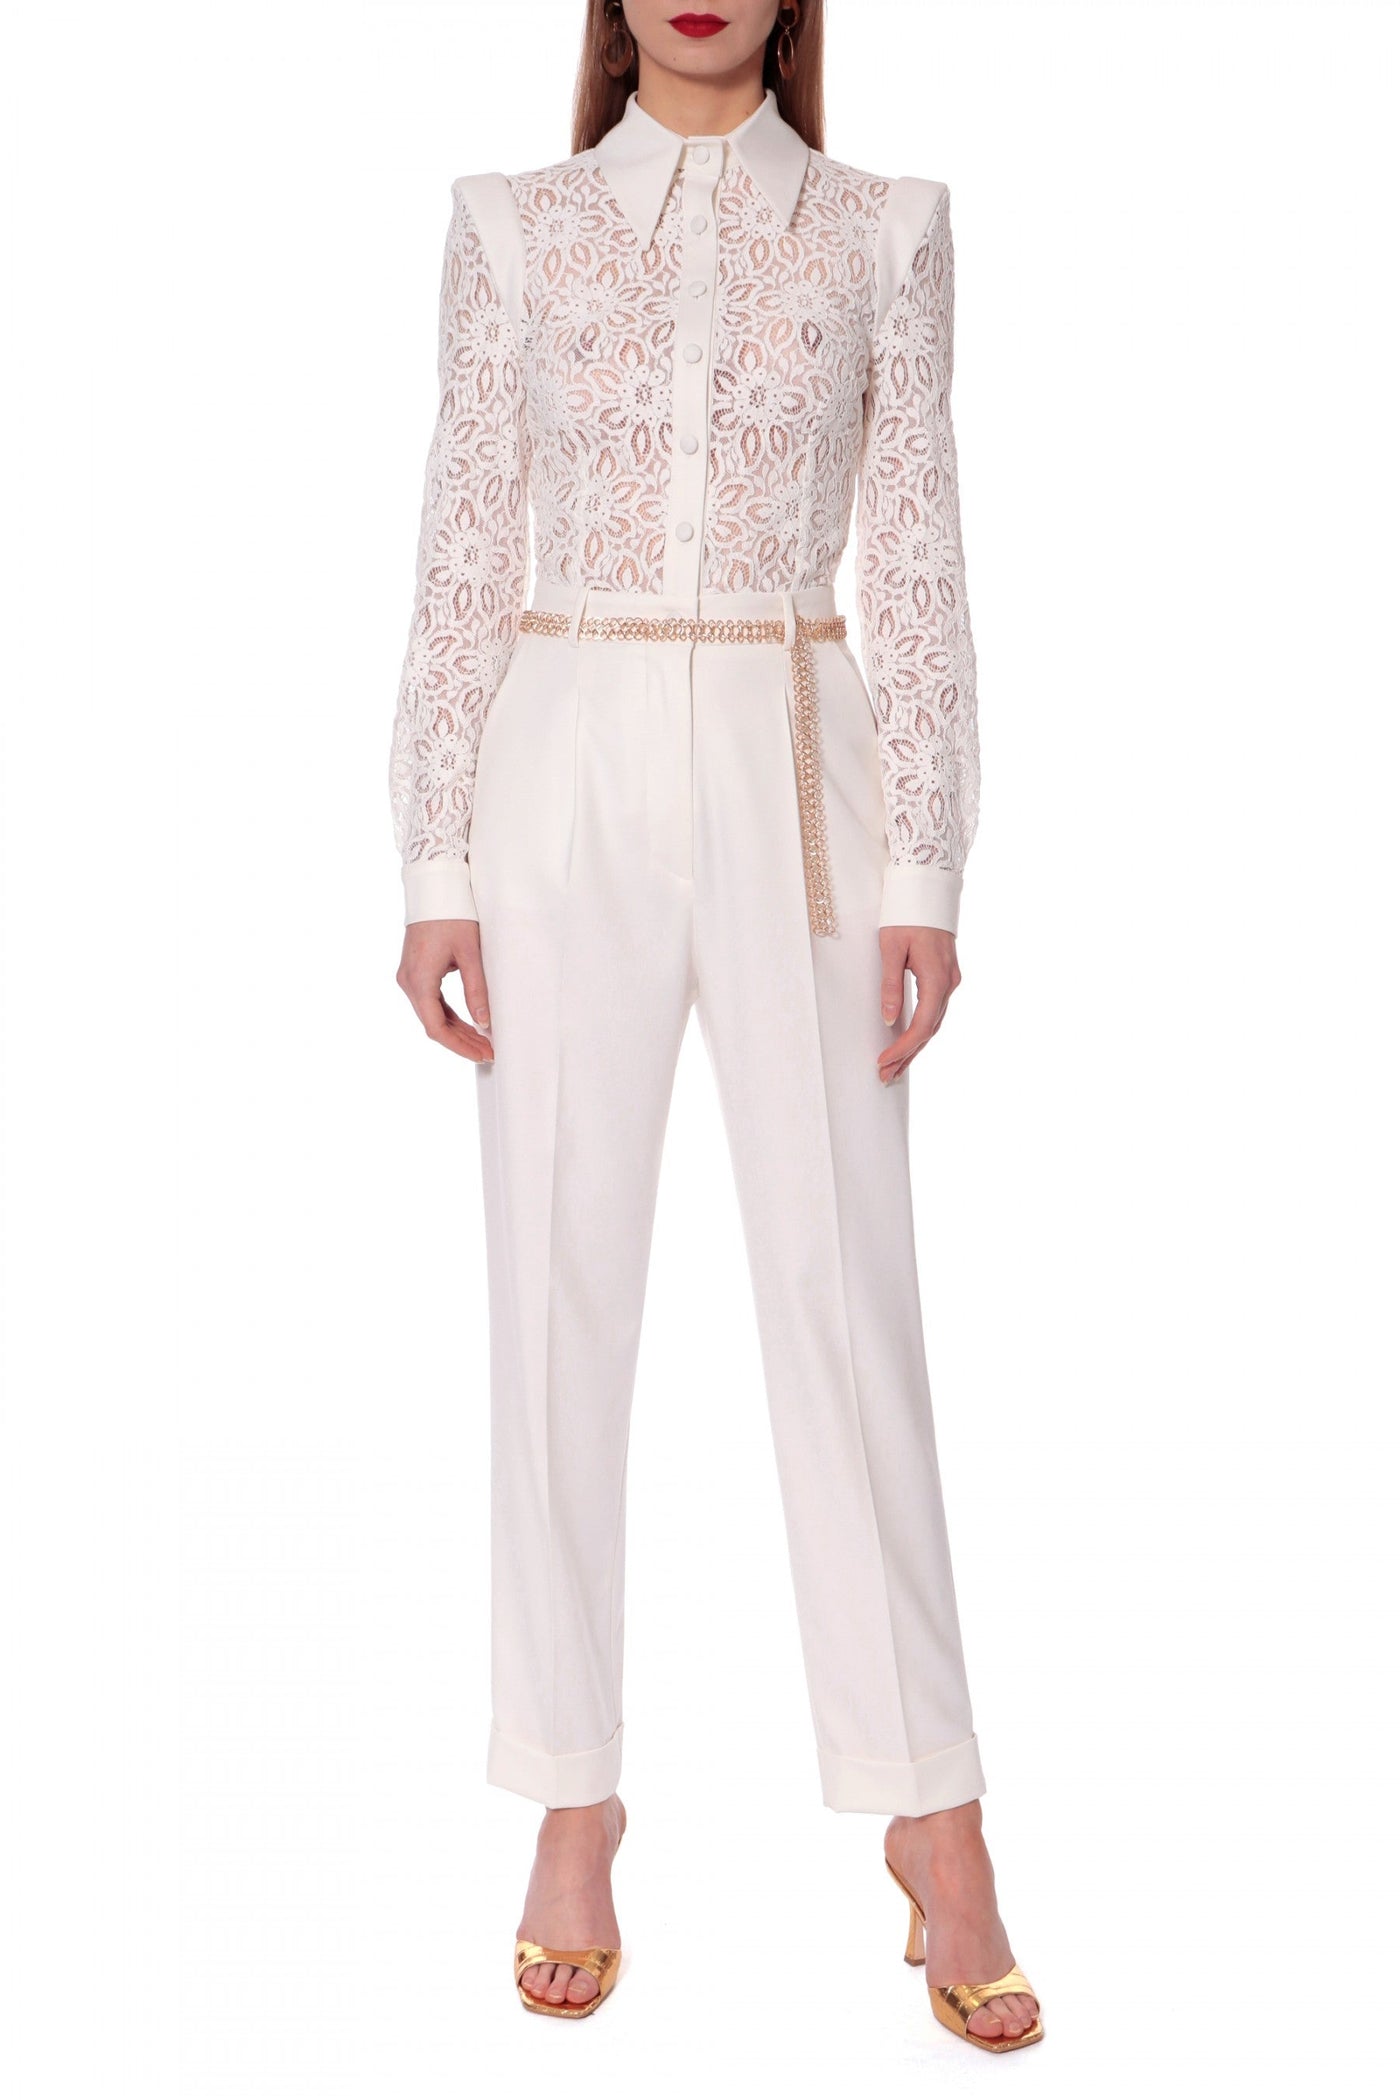 Aylin Aesthetic White Lace Top Jumpsuit